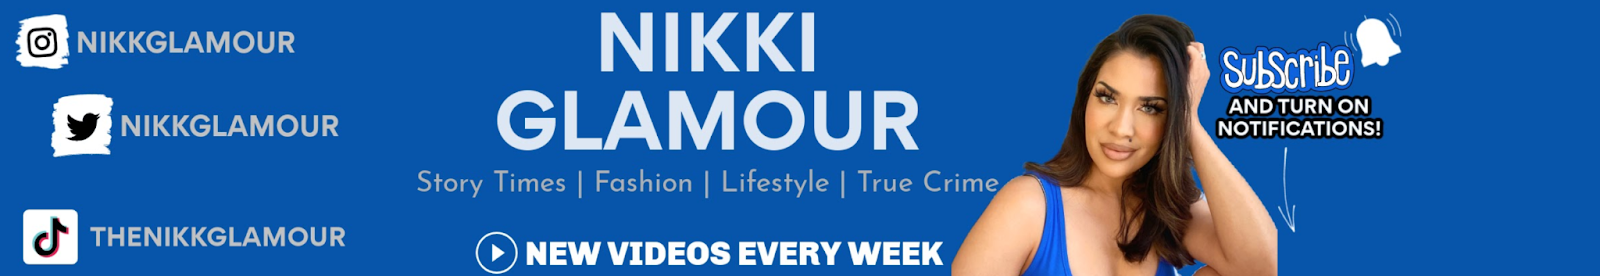 Nikki Glamour Connecting With Others through YouTube Story Times 